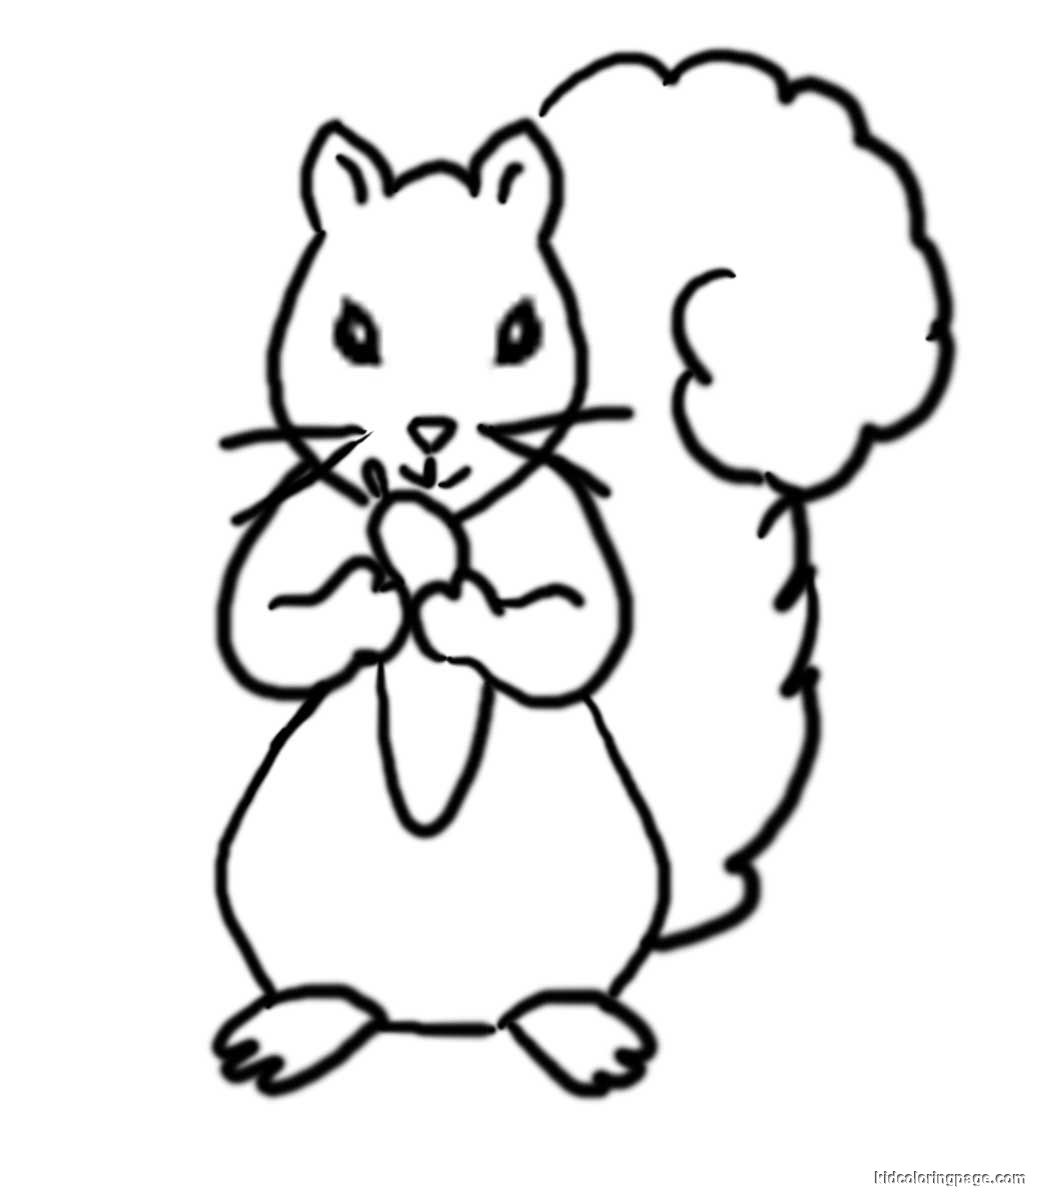 Squirrel Coloring Pages For Preschool | Free Coloring Pages Printable